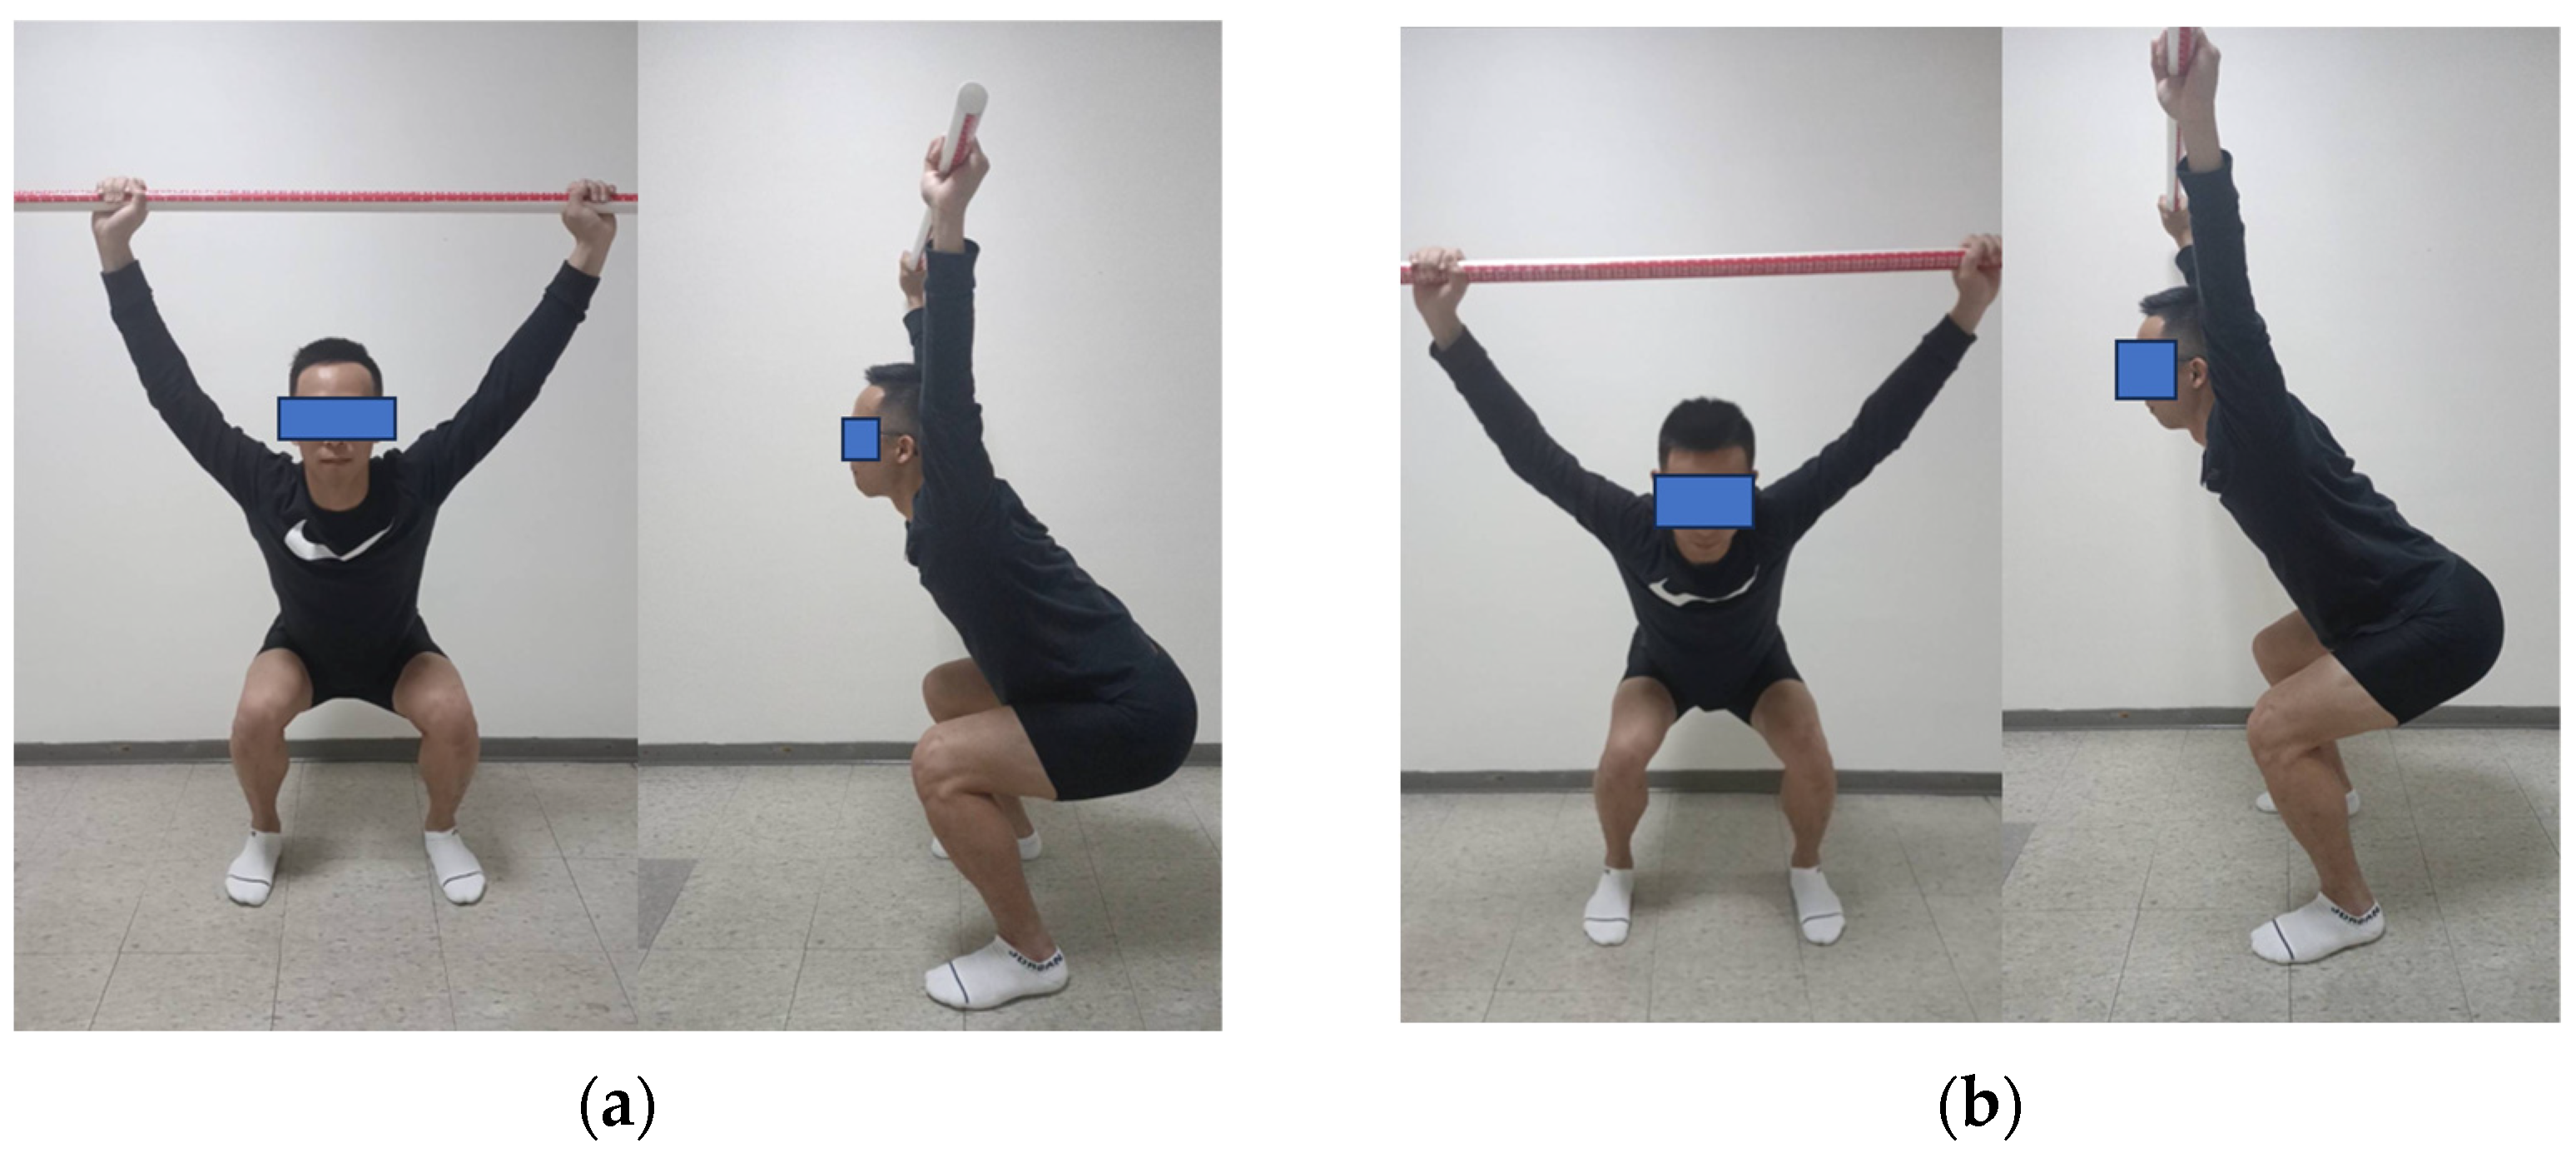 The Overhead Squat: What Is It Good For?